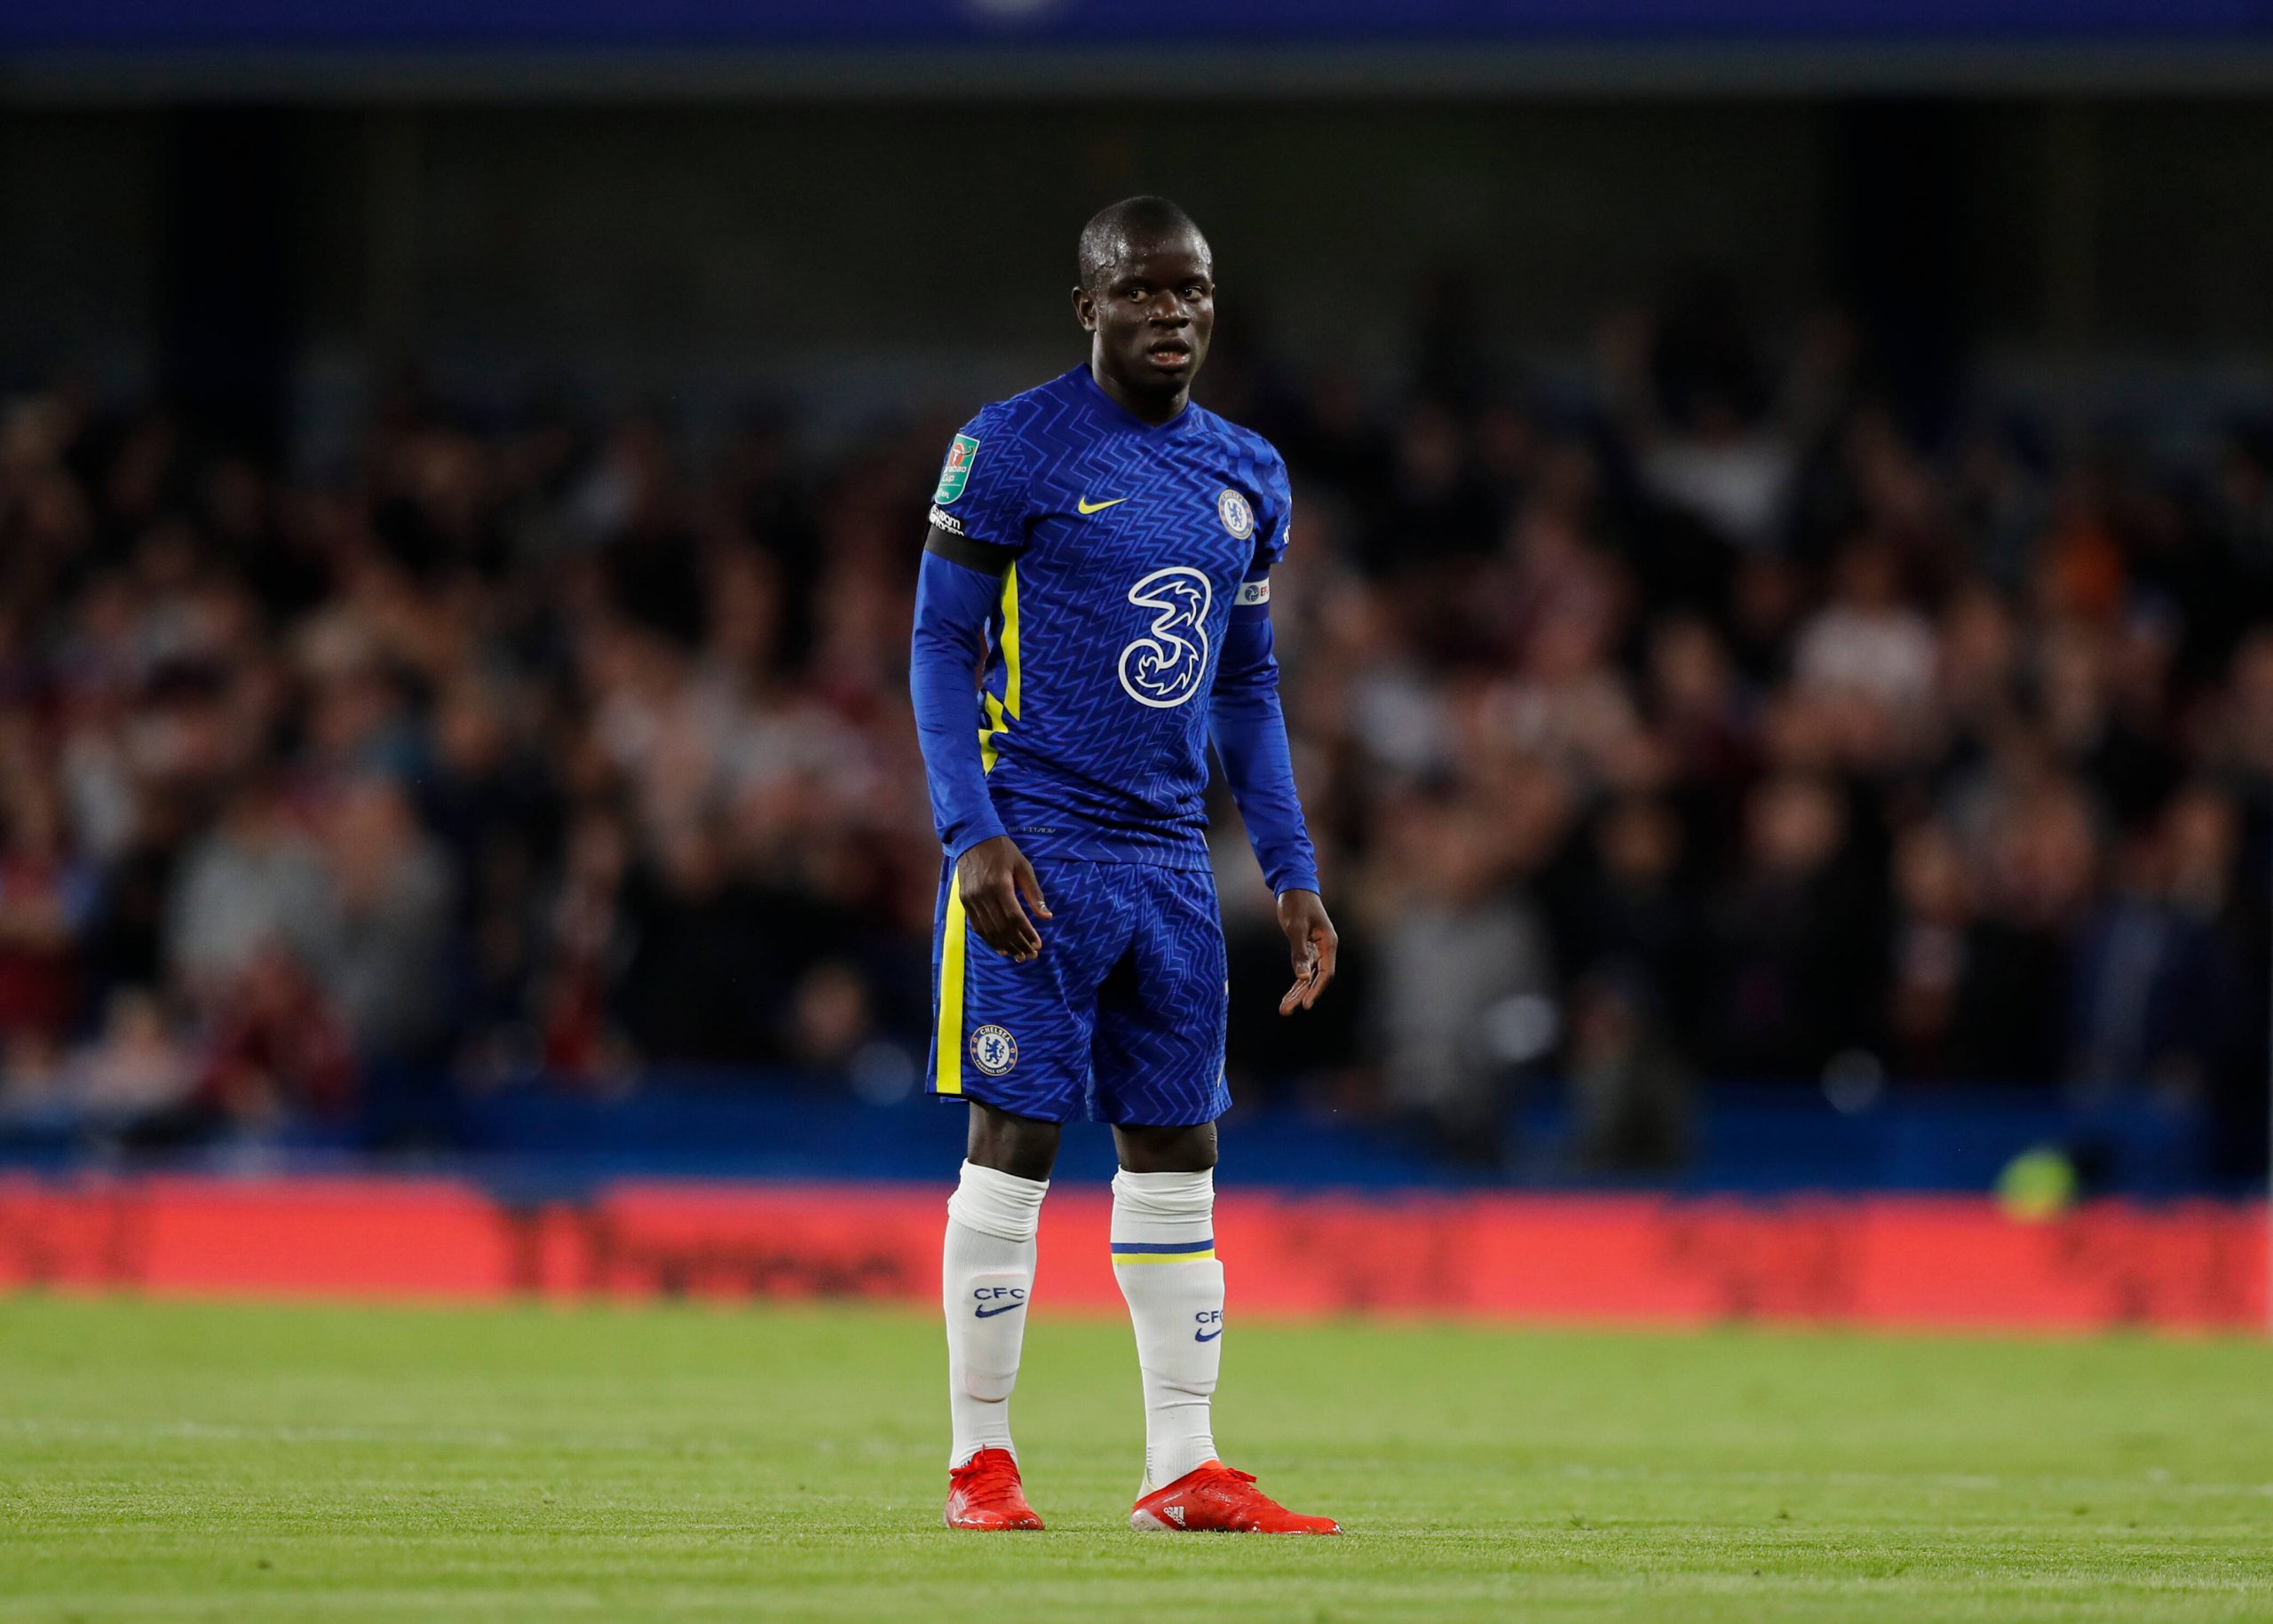 Chelsea told to let N'Golo Kante leave instead of meeting his contract demands